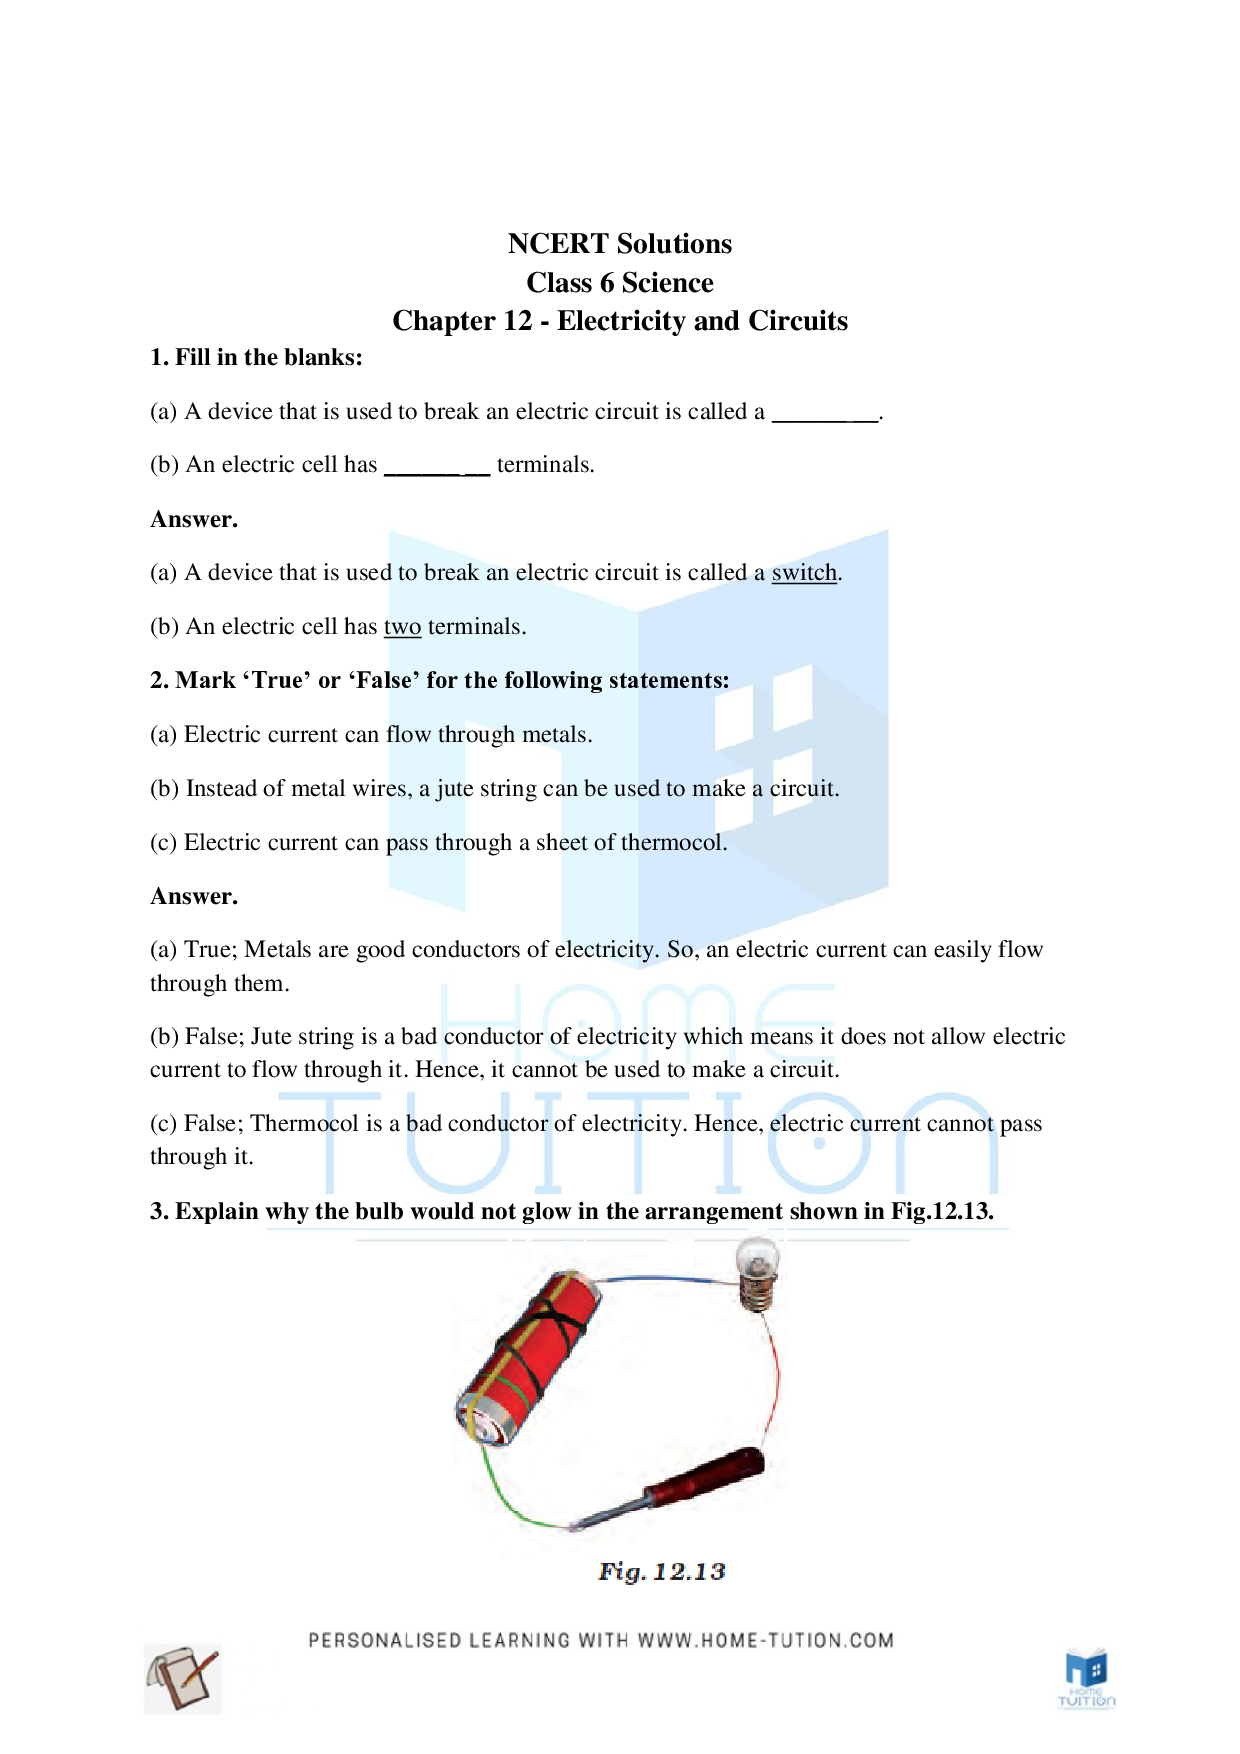 Class 6 Science Chapter 12 Electricity and Circuits